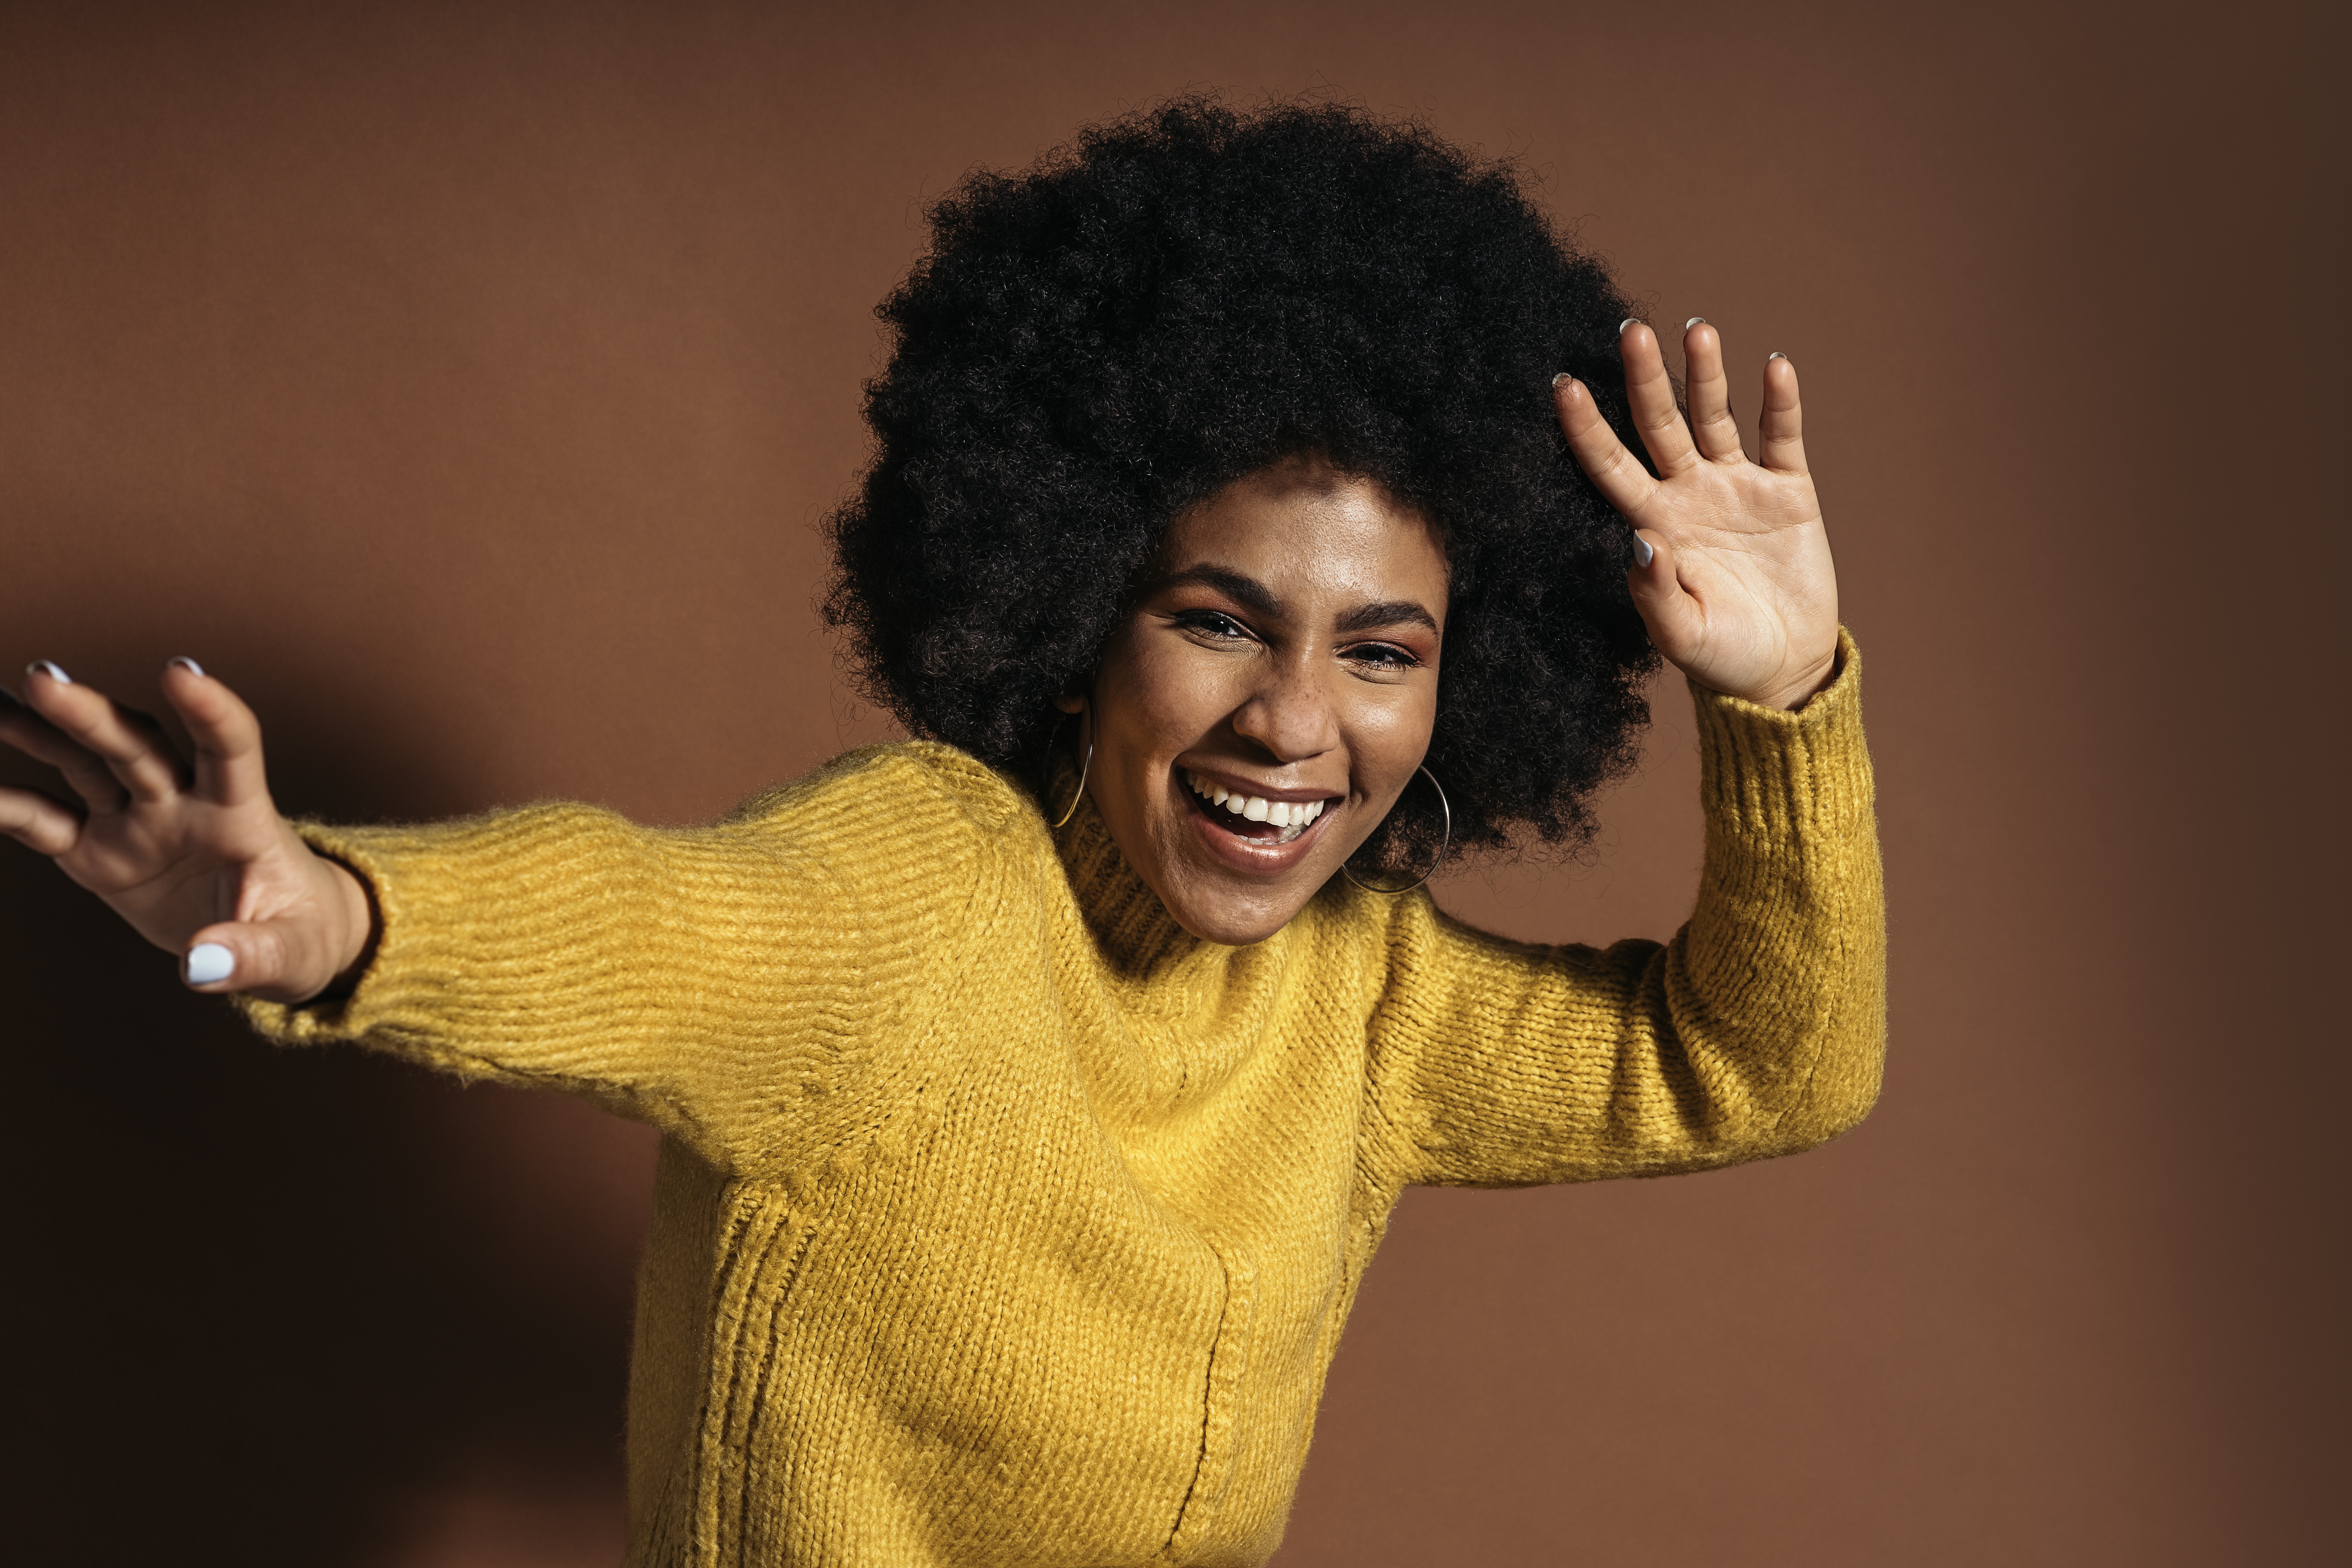 Woman in yellow knit sweater smiling